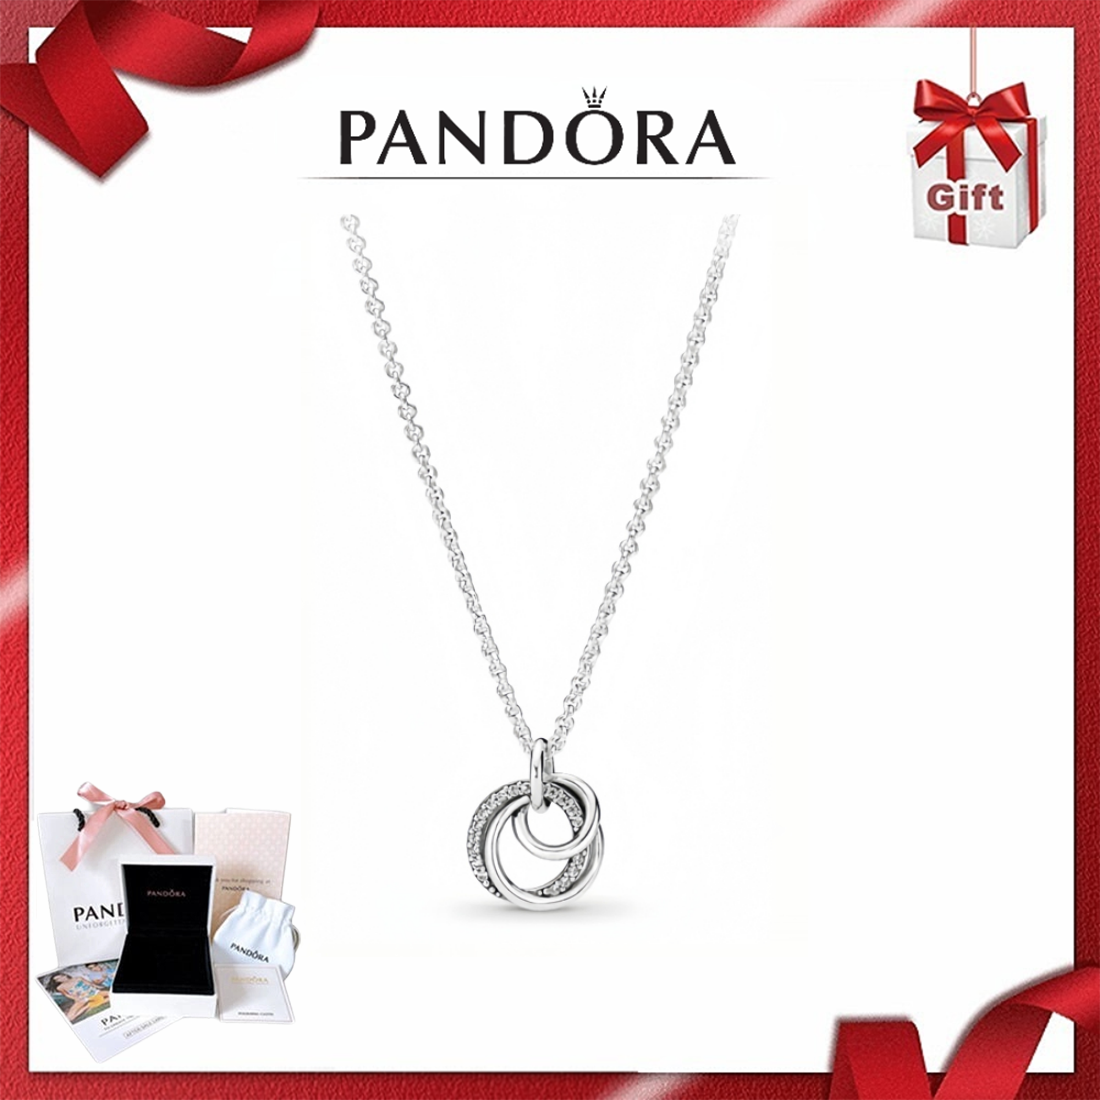 Pandora - Style queens know there's always a secret hidden inside a locket.  The Pandora Crown O Locket Necklace brings a fresh spin on the traditional  style with its iconic Pandora O